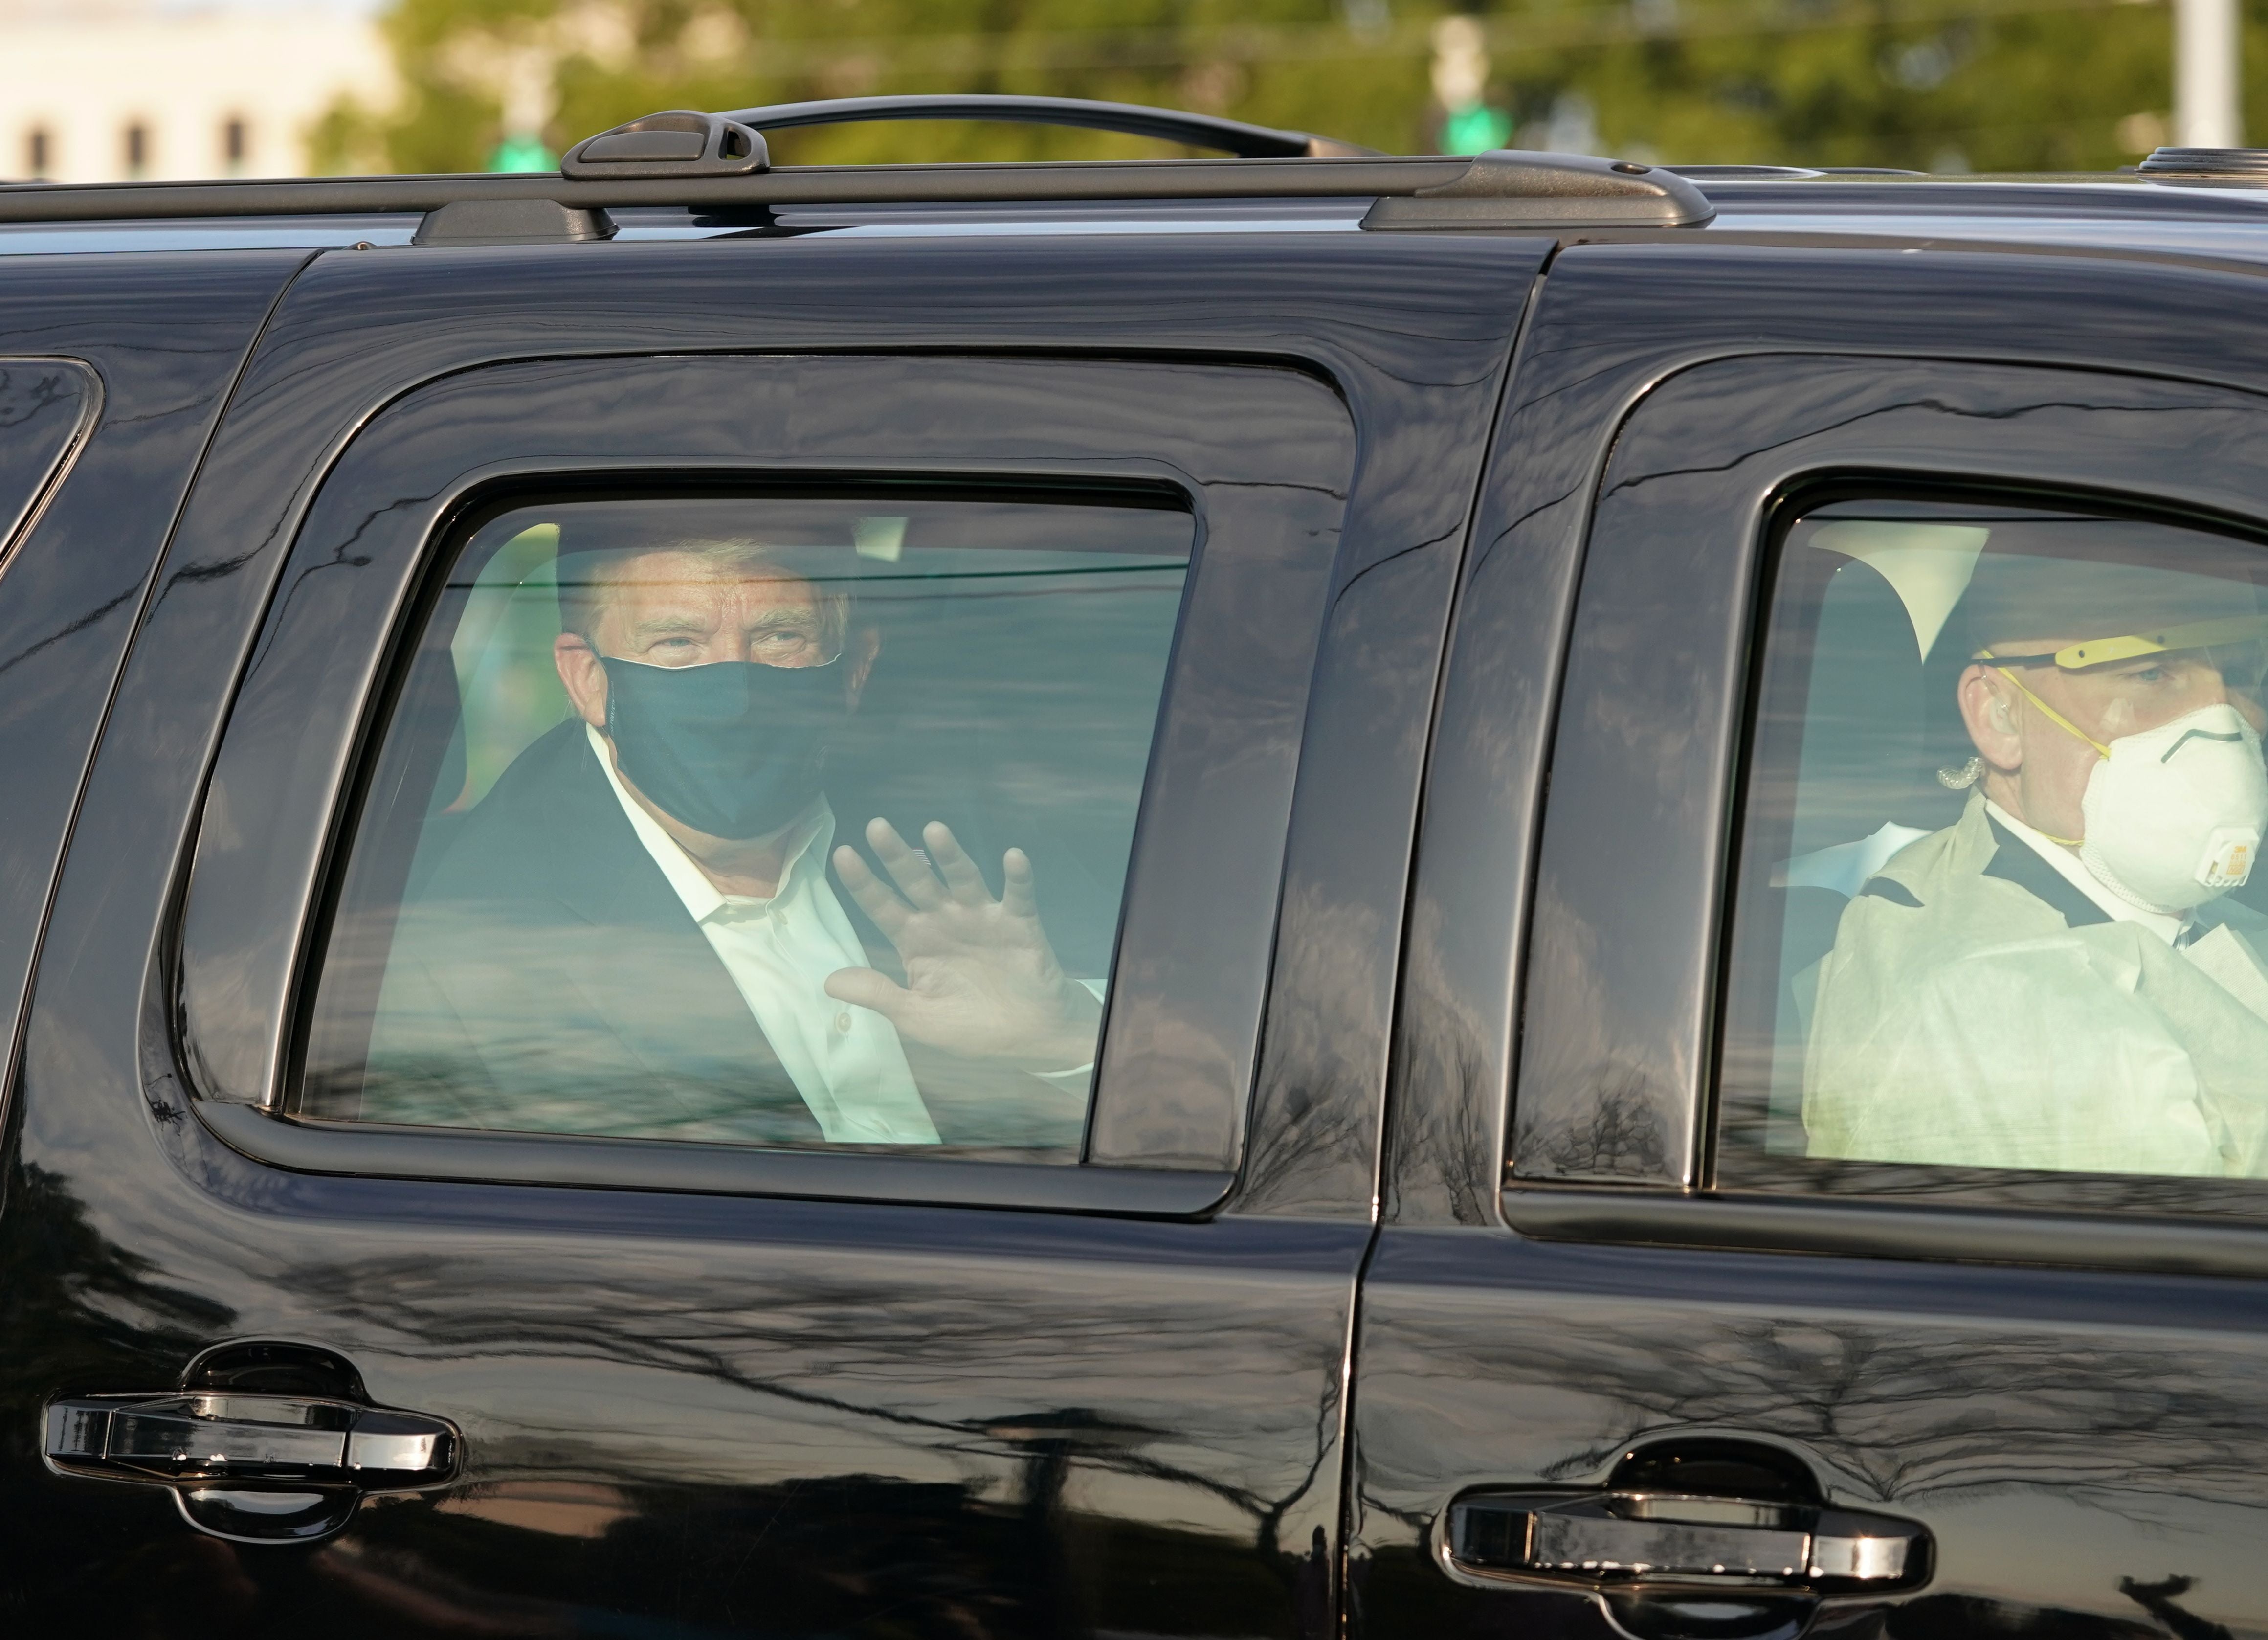 President Trump waves from the back of a car in a motorcade outside of Walter Reed Medical Center in Bethesda, Maryland on October 4, 2020.&nbsp;